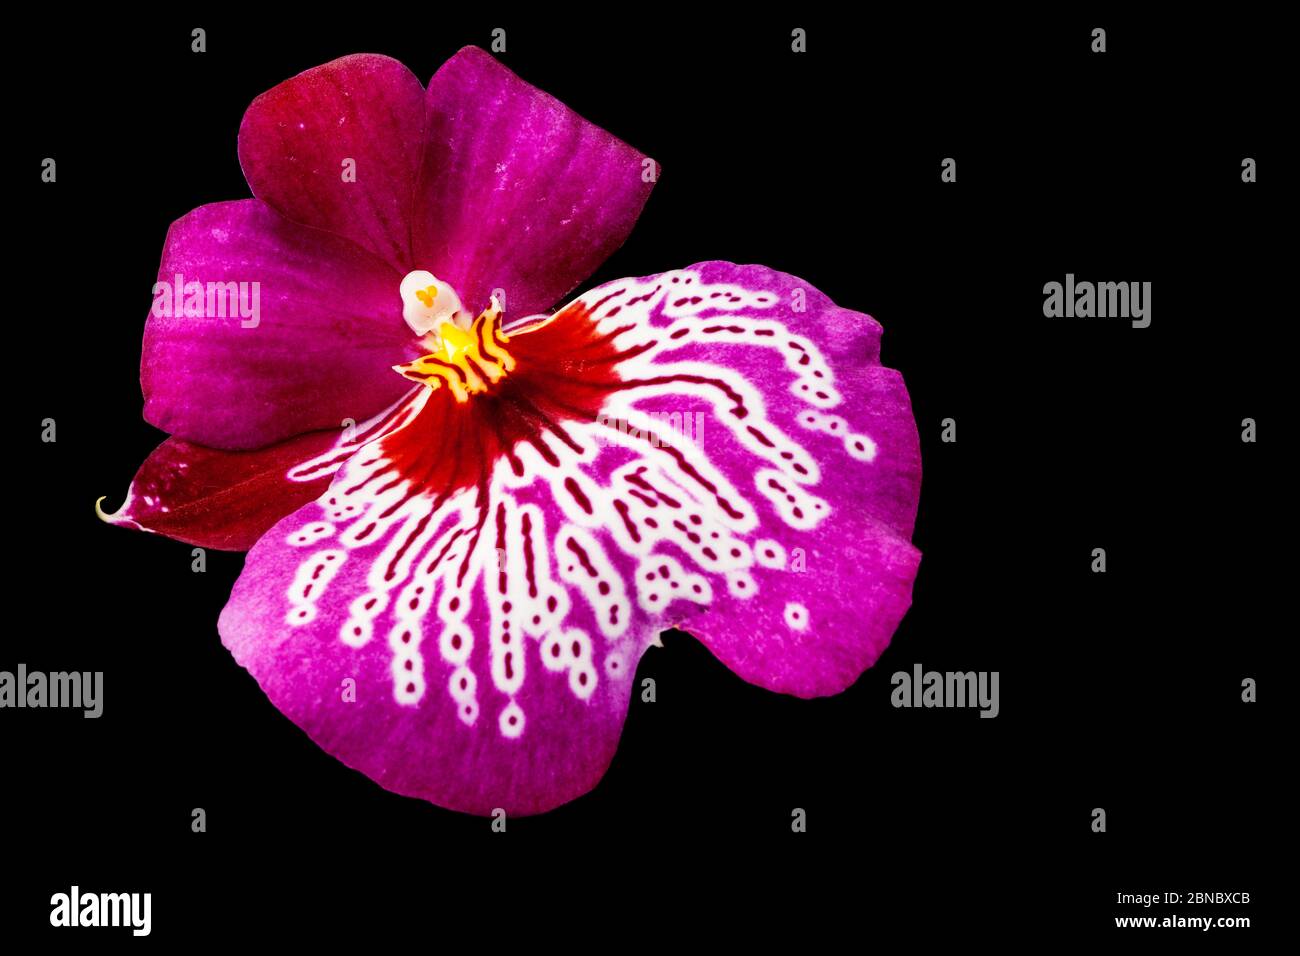 Frontal closeup of a purple beautifully patterned pansy orchid with a clearly visible hub and pollen isolated on black. Stock Photo